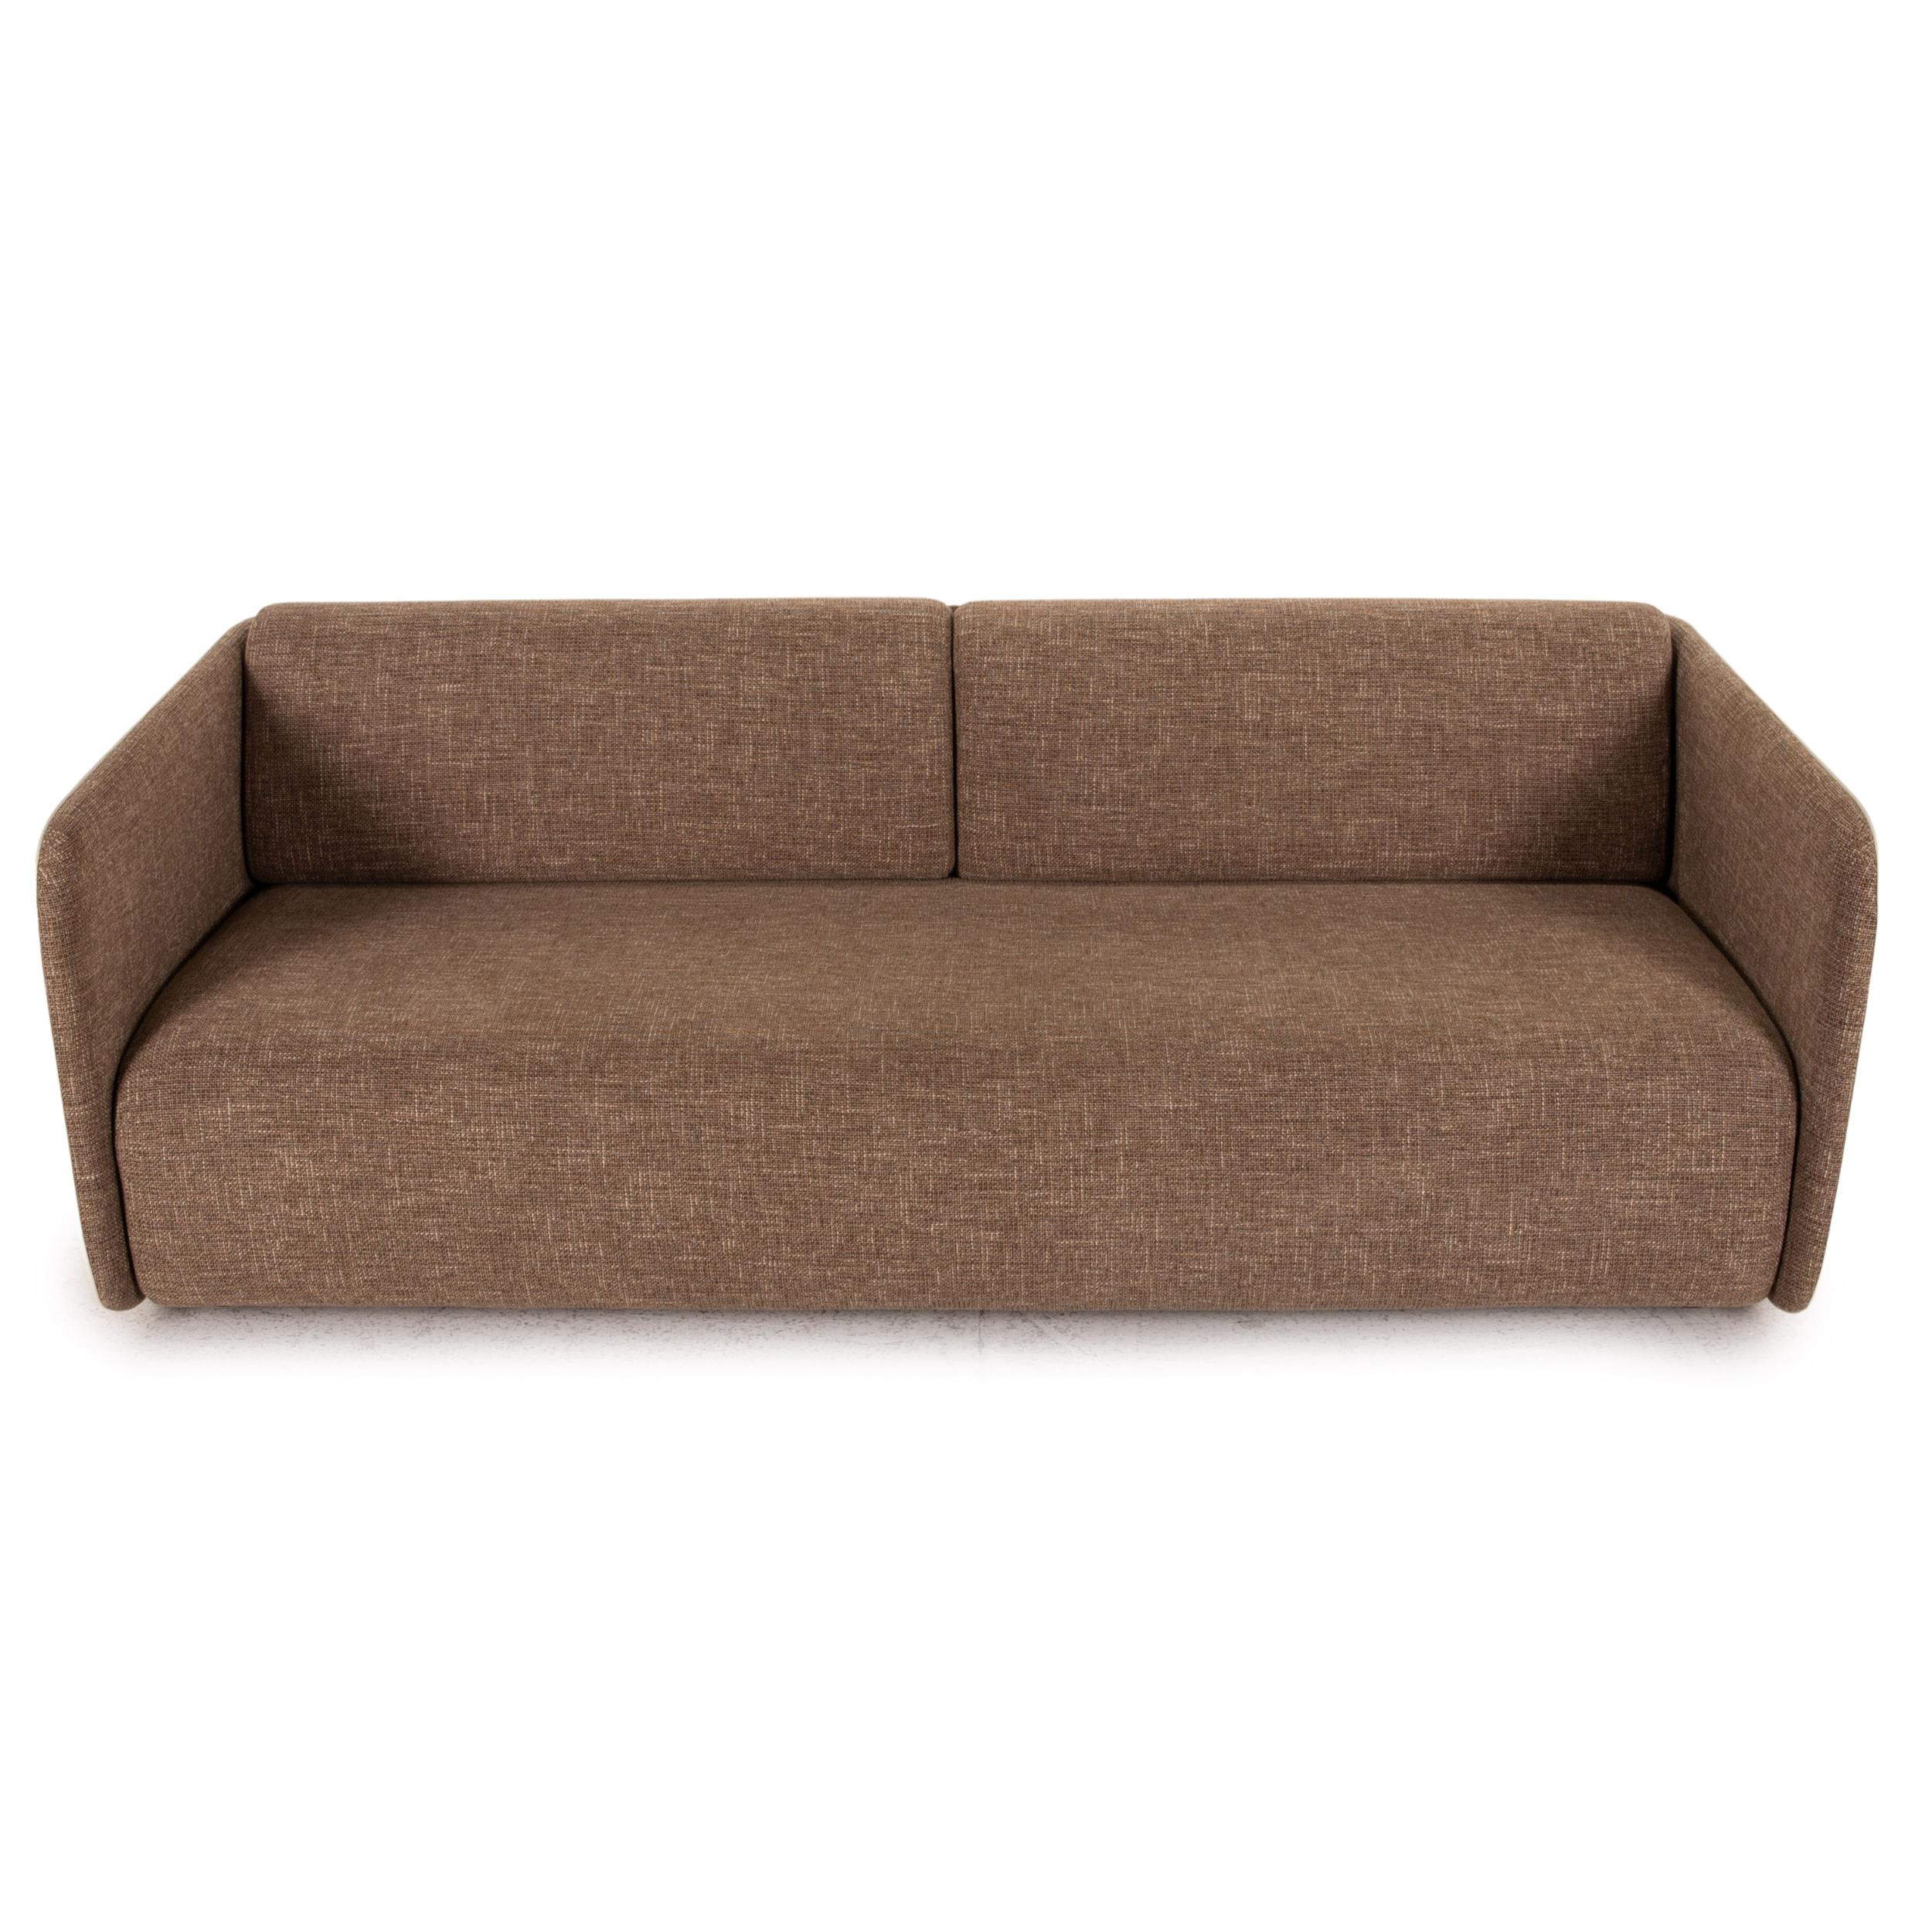 Contemporary Rolf Benz 6900 Fabric Leather Three-Seater Cream Brown Sofa Couch For Sale